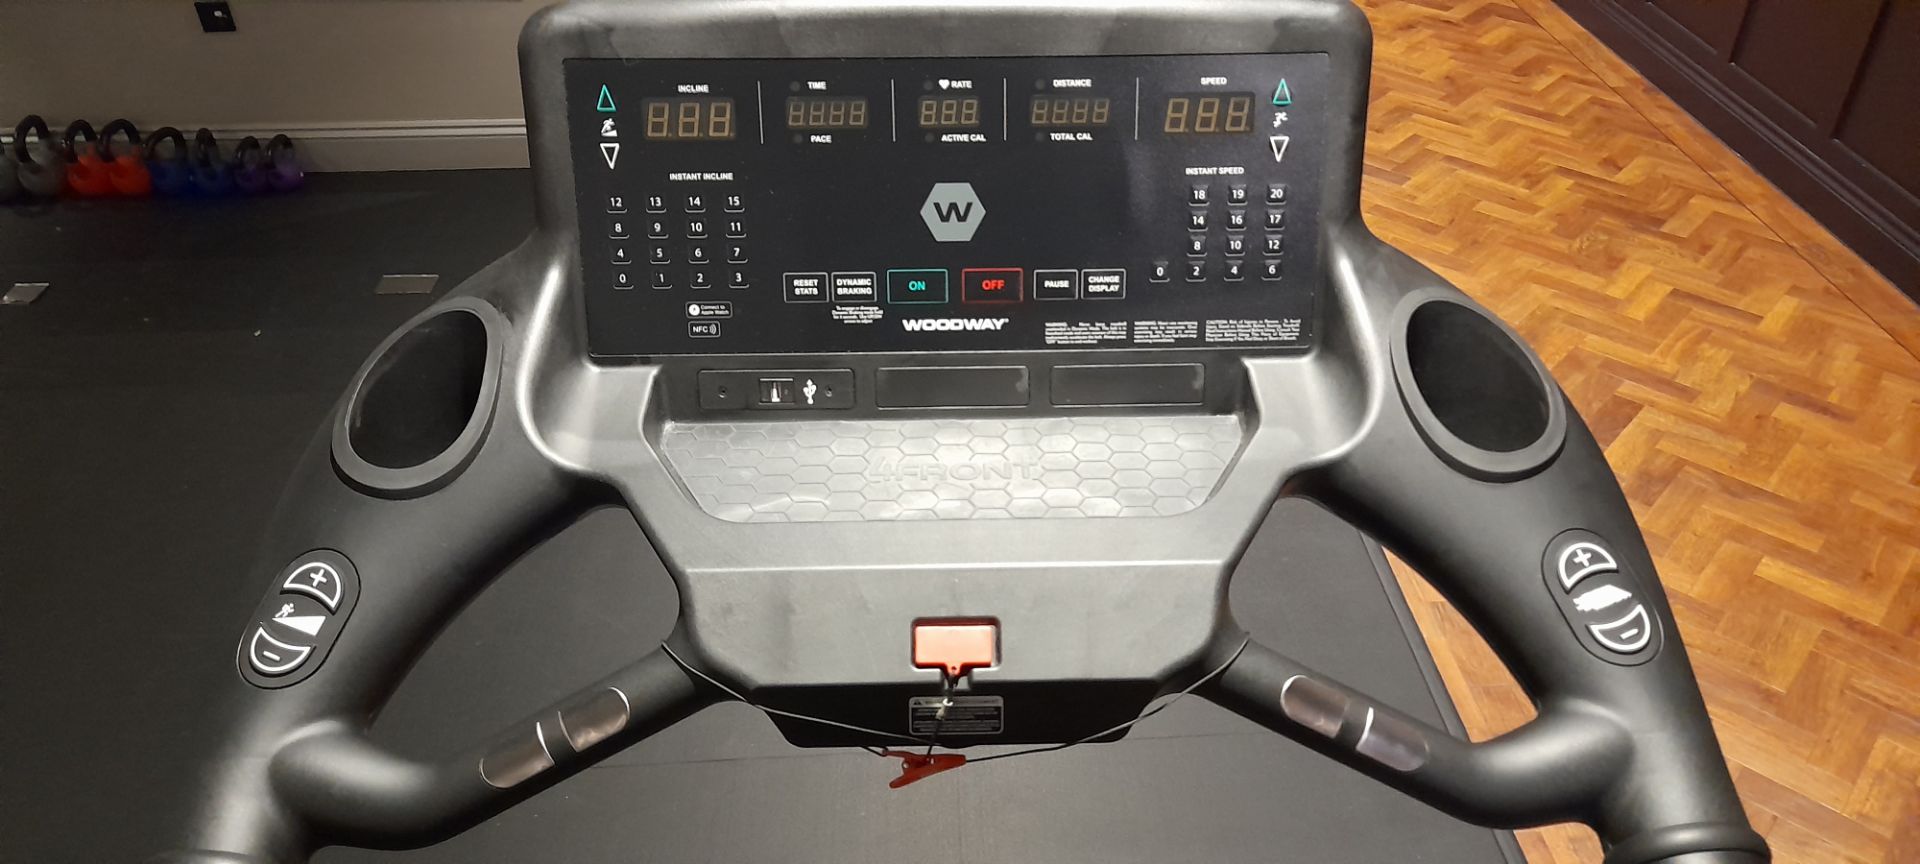 Woodway 4 front slatted belt commercial fitness treadmill Serial number 558100620 - Image 4 of 5